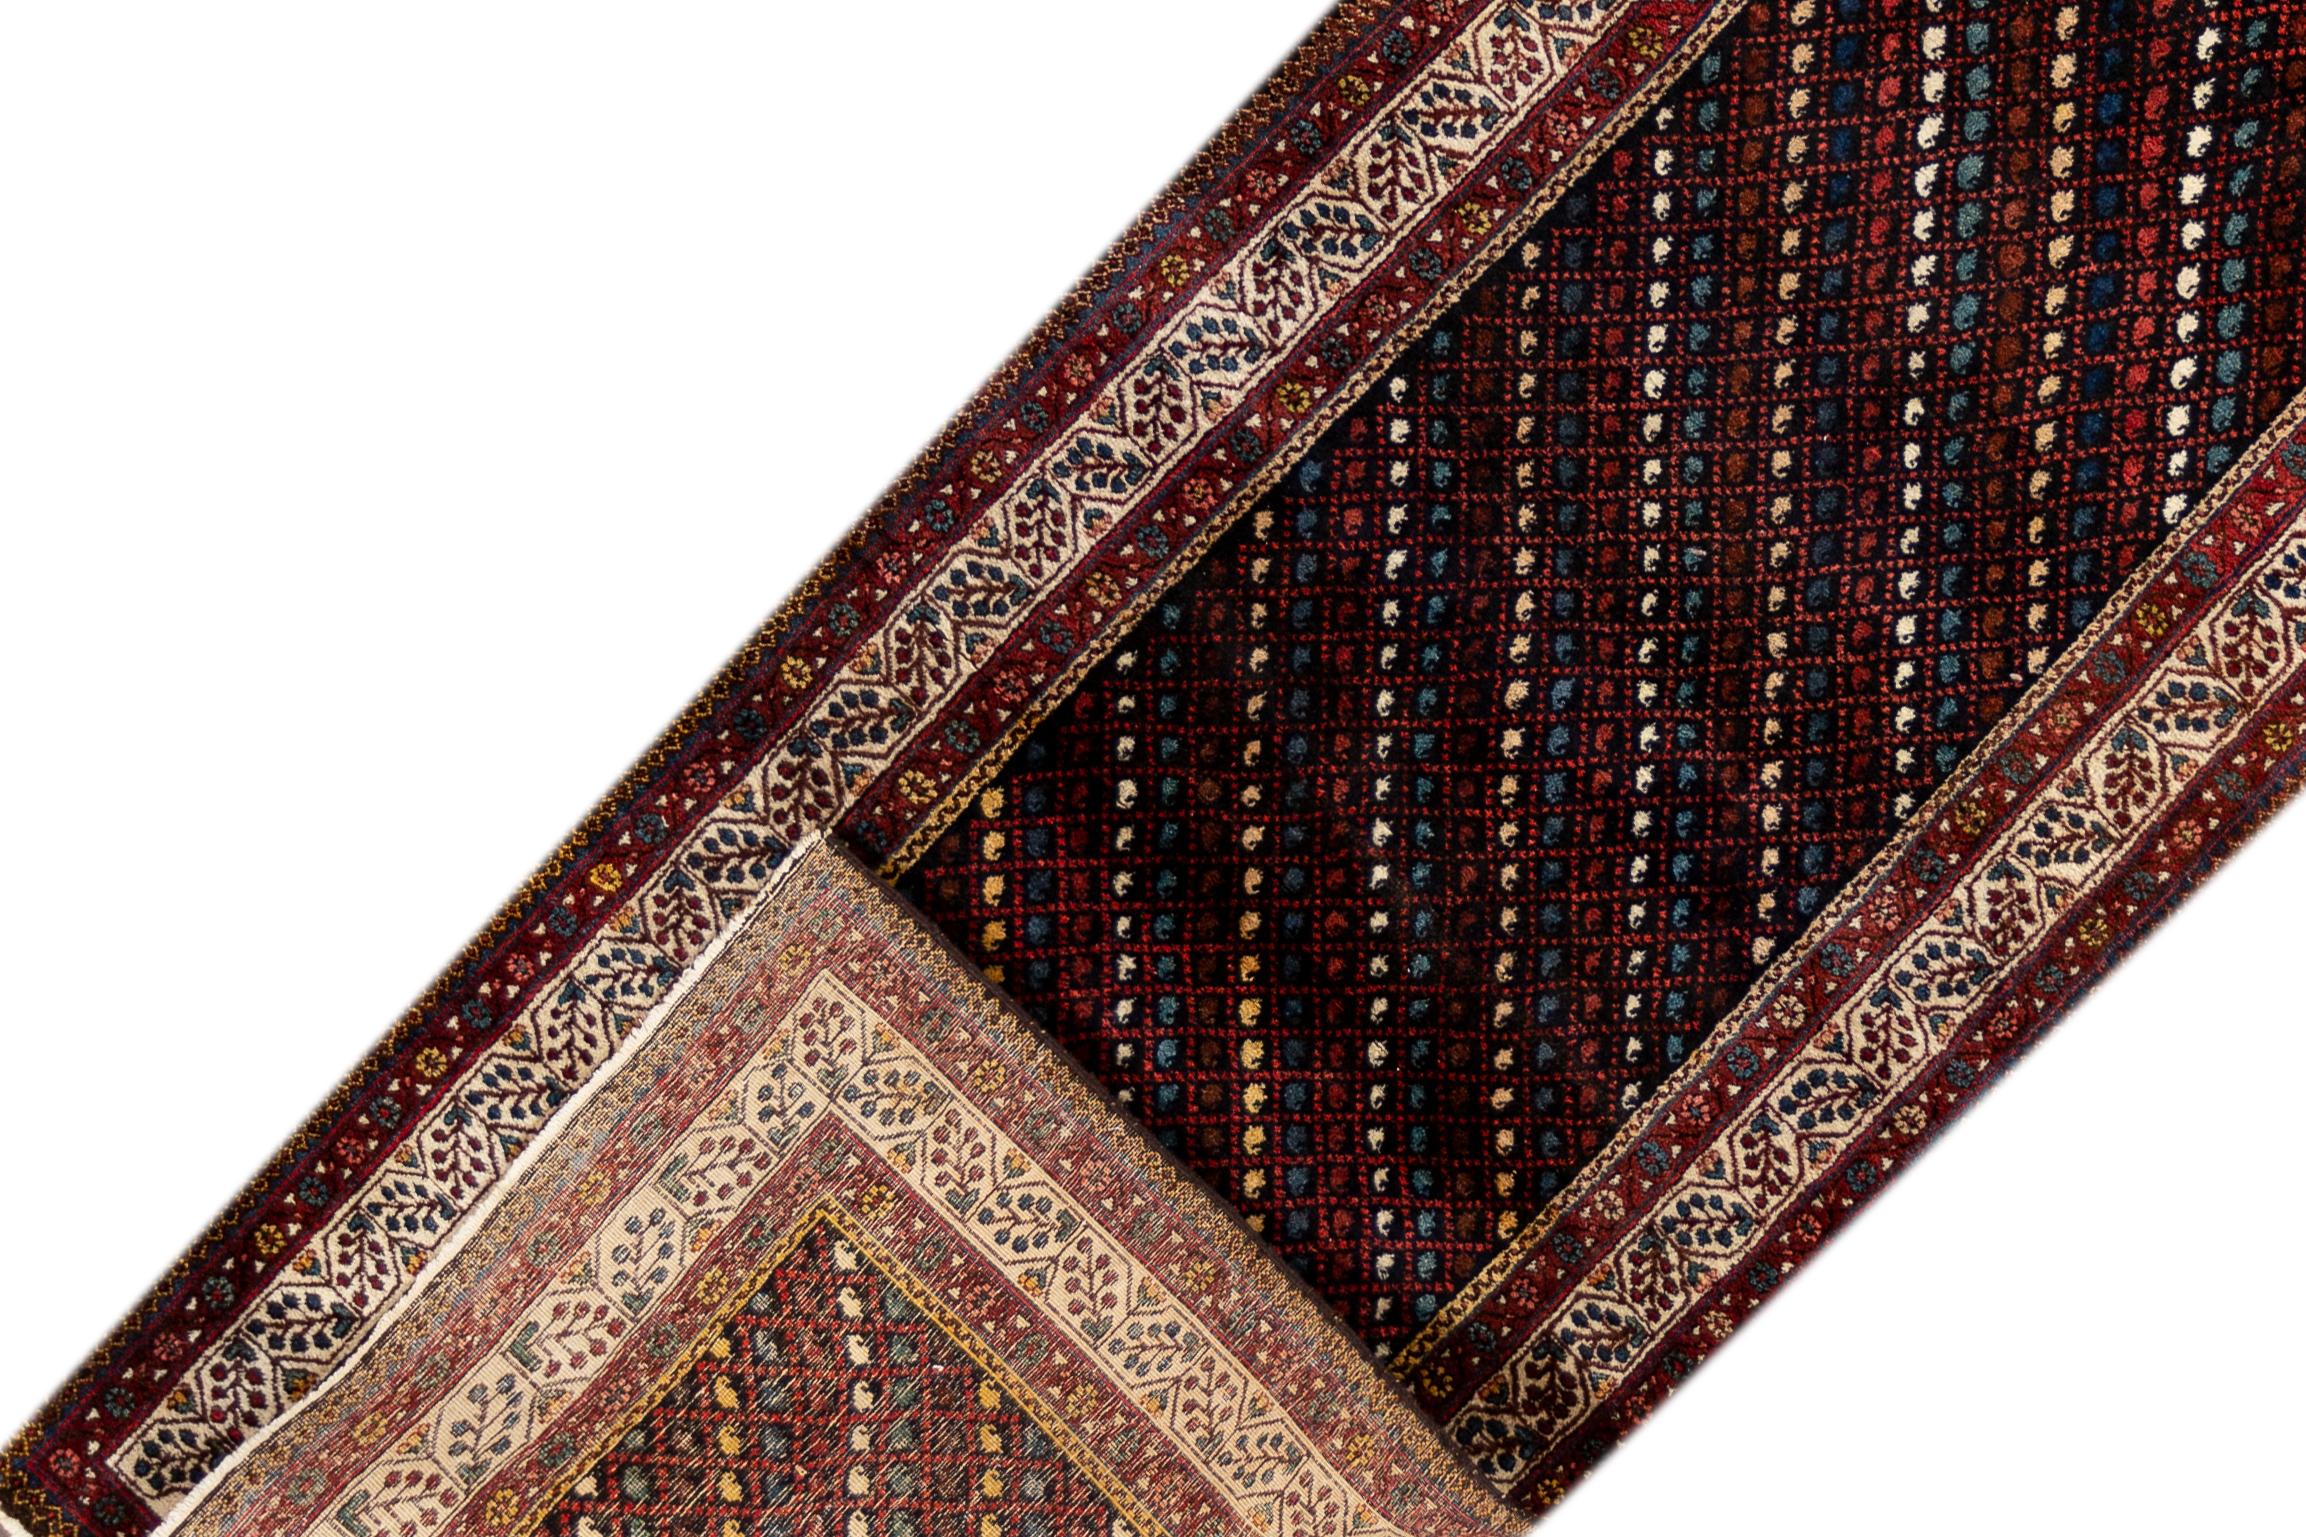 A 20th century vintage Heriz runner rug with a dark red field, a striped motif and a border. This rug measures at 3'8